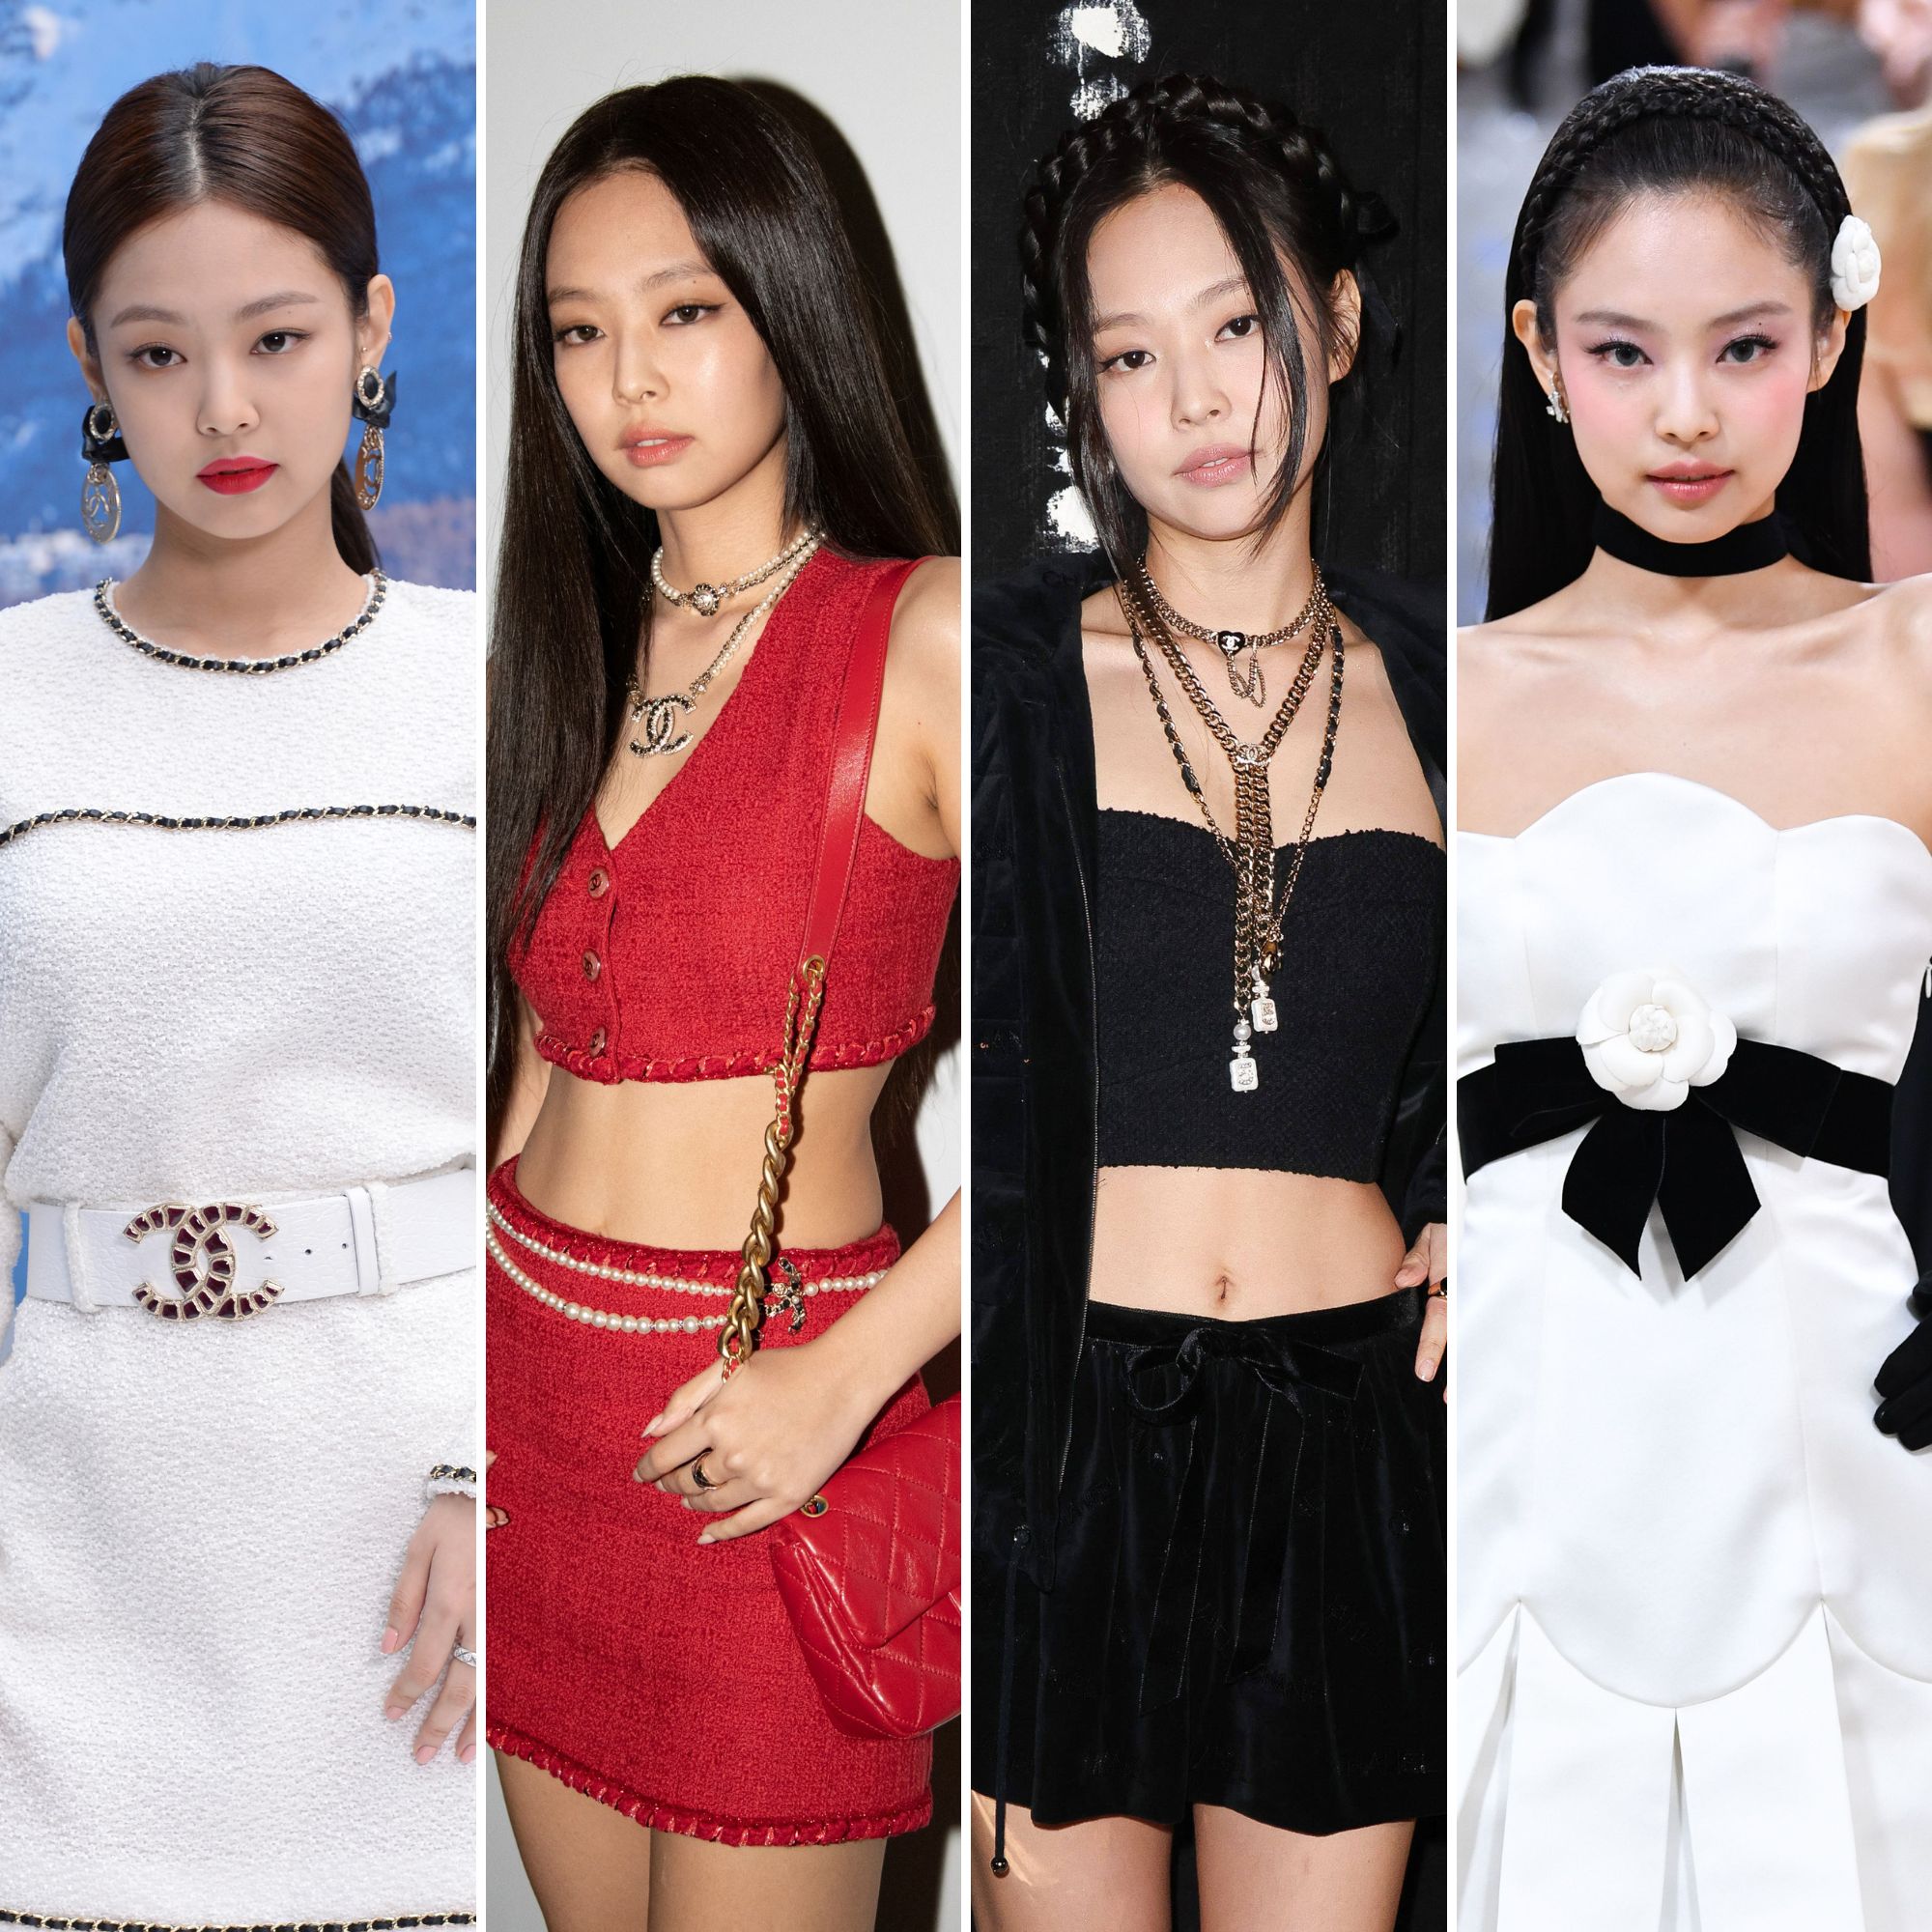 12 of Blackpinks Jennies bestever Chanel fashion looks the houses rep  wears vintage tees with Lisa and Jisoo and headtotoe tweed and rocked a  crochet dress also sported by LilyRose Depp 